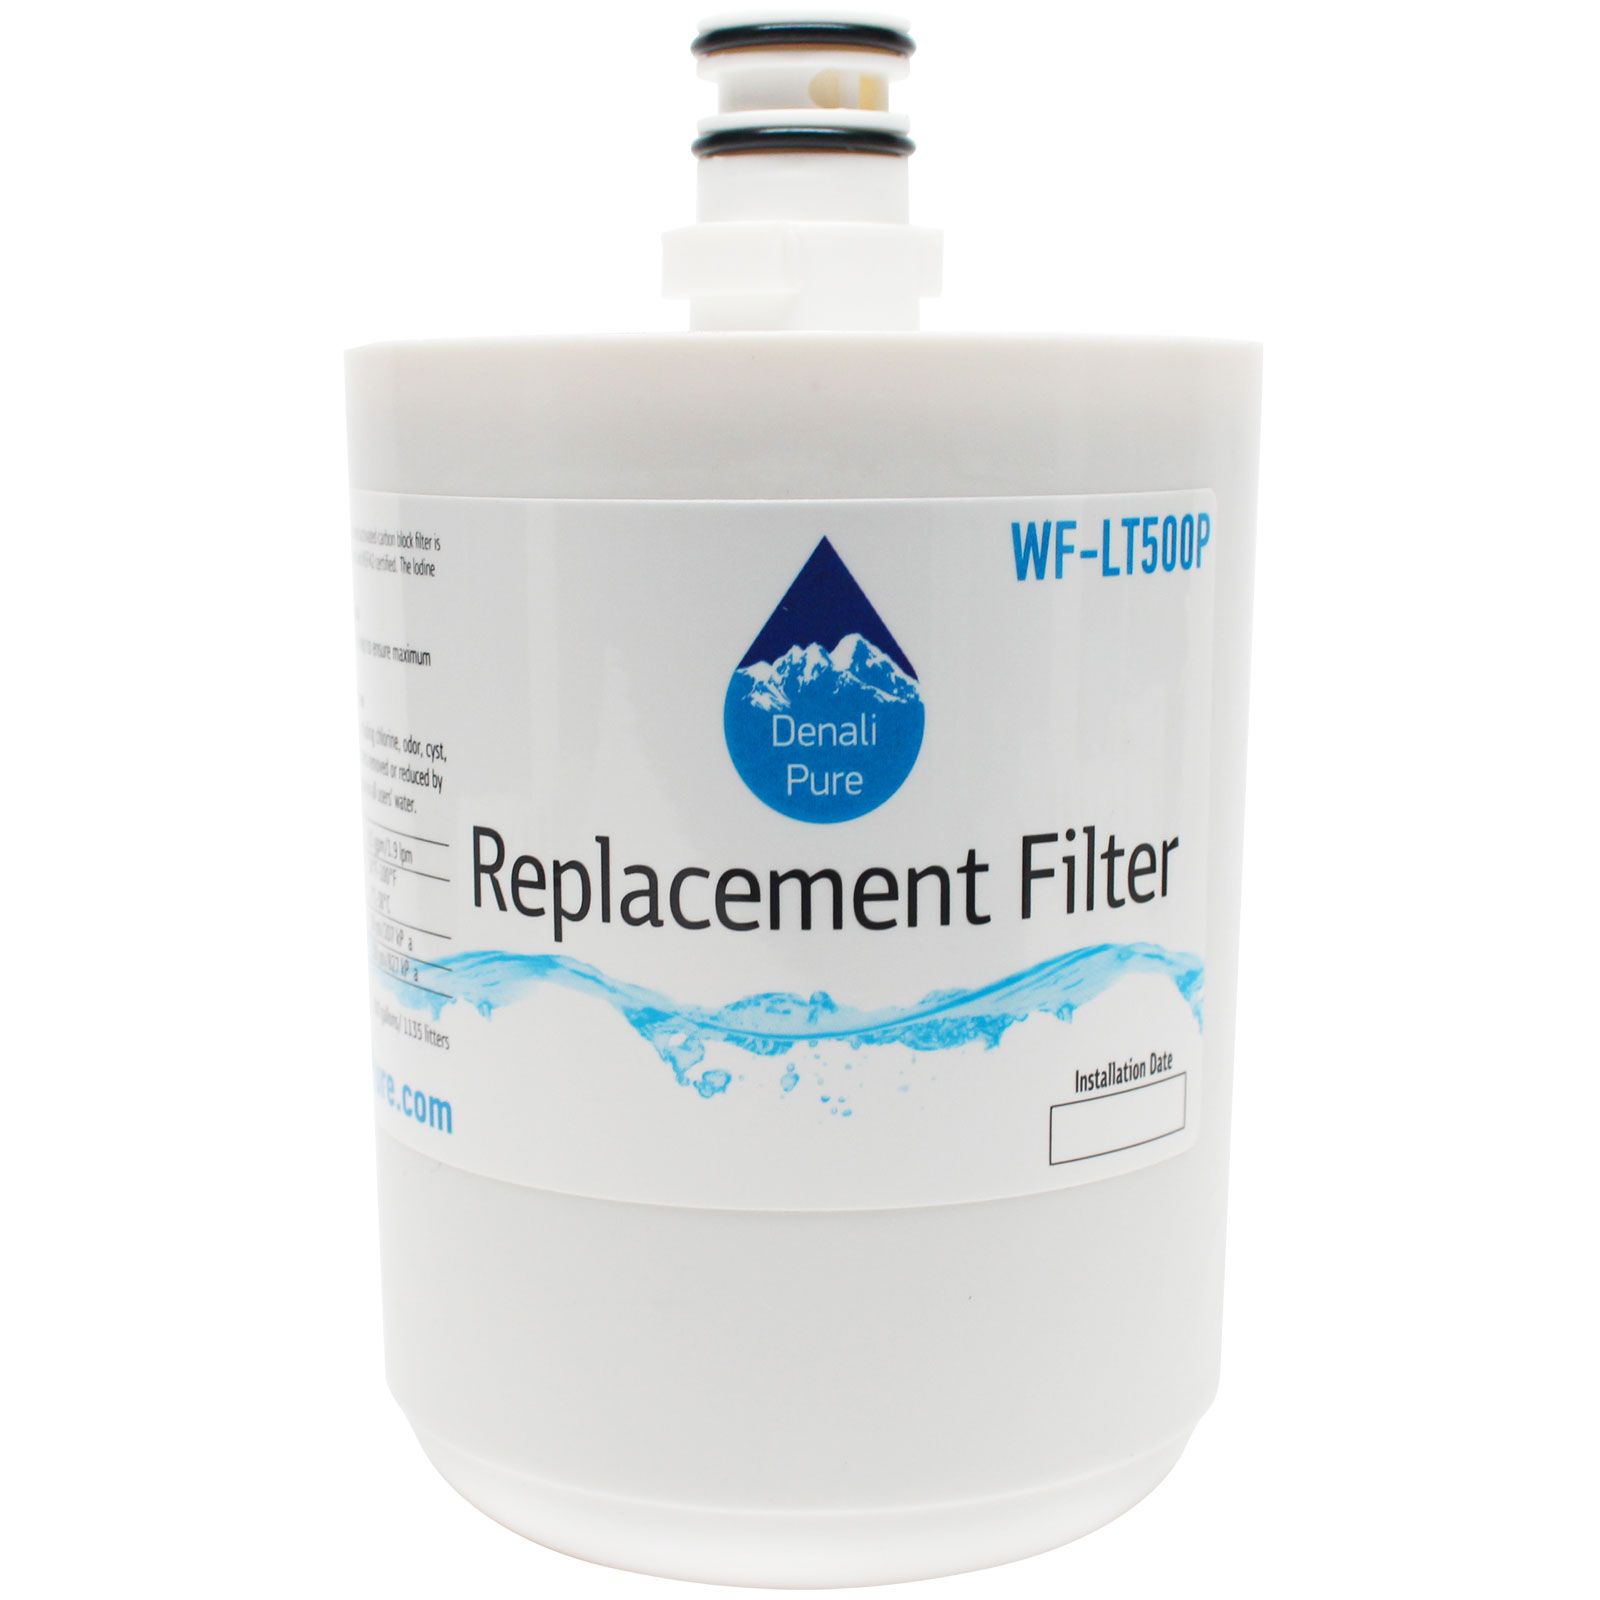 UpStart Components Replacement Sears/Kenmore 79551014011 Fridge Water Filter-For Sears/Kenmore ADQ72910902 GEN11042FR-08 46-9890 Water Filter